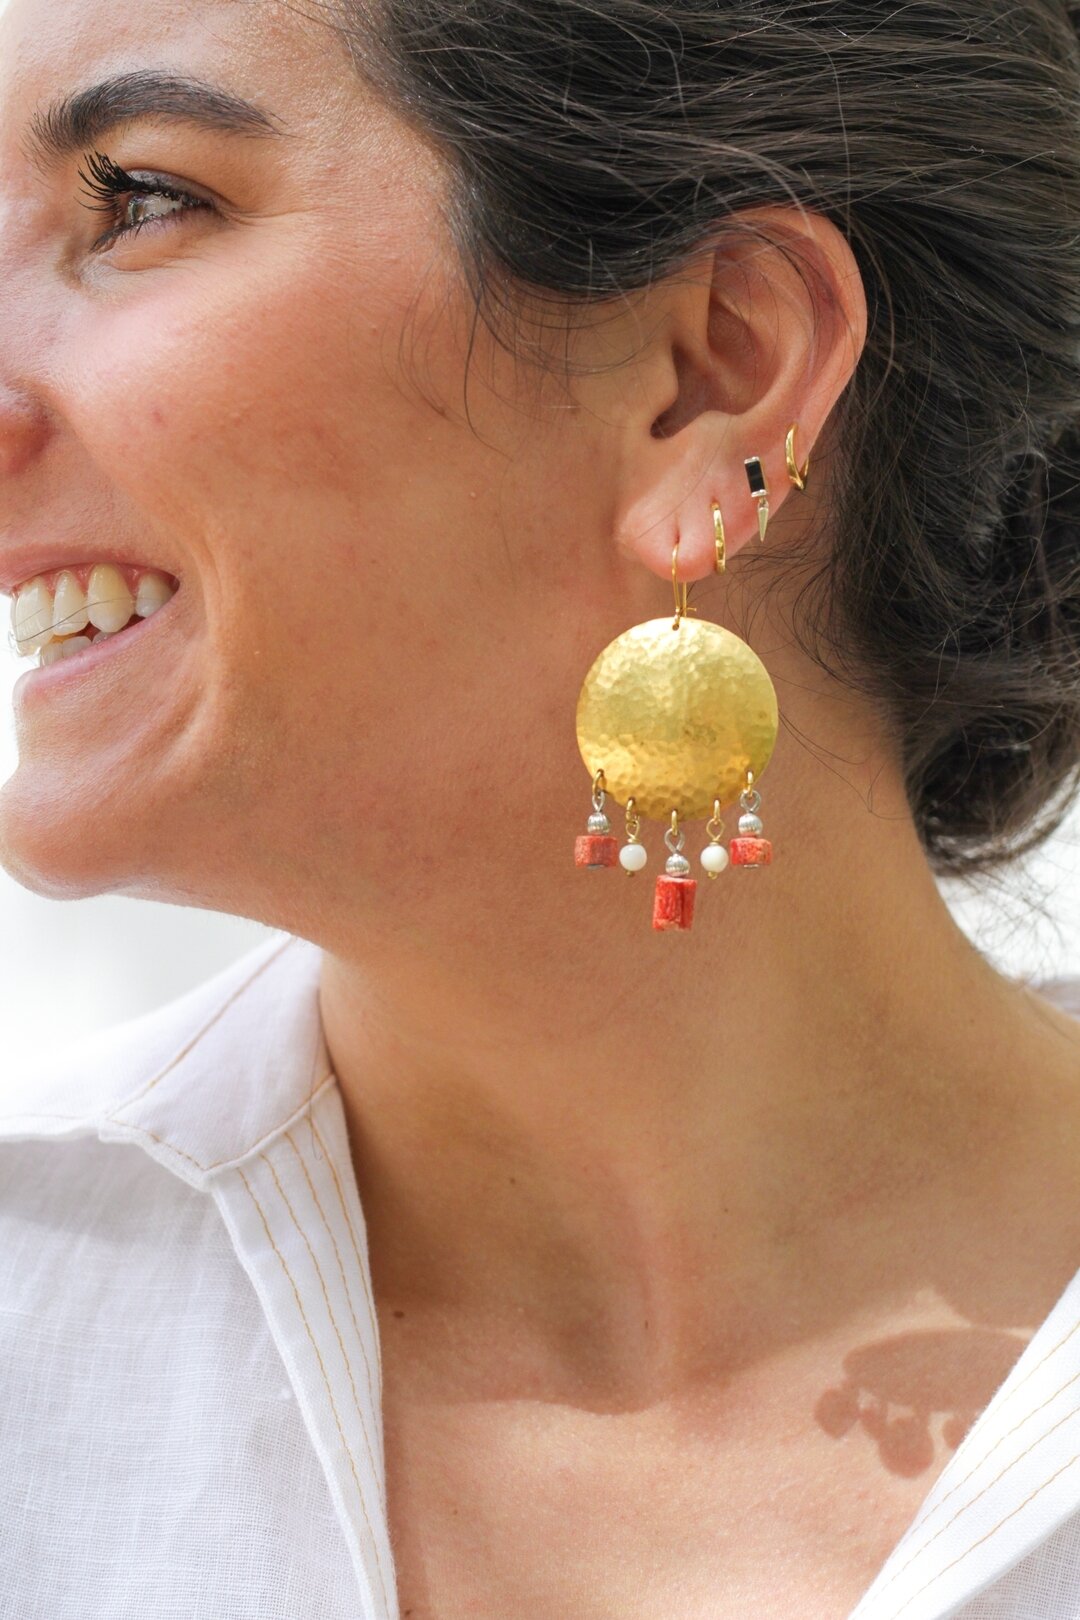 Meet the new Rosie Earring created from vintage elements of brass, coral and mother of pearl. A lightweight statement earring with a movement that makes it fun to wear!

Vintage elements given a new story